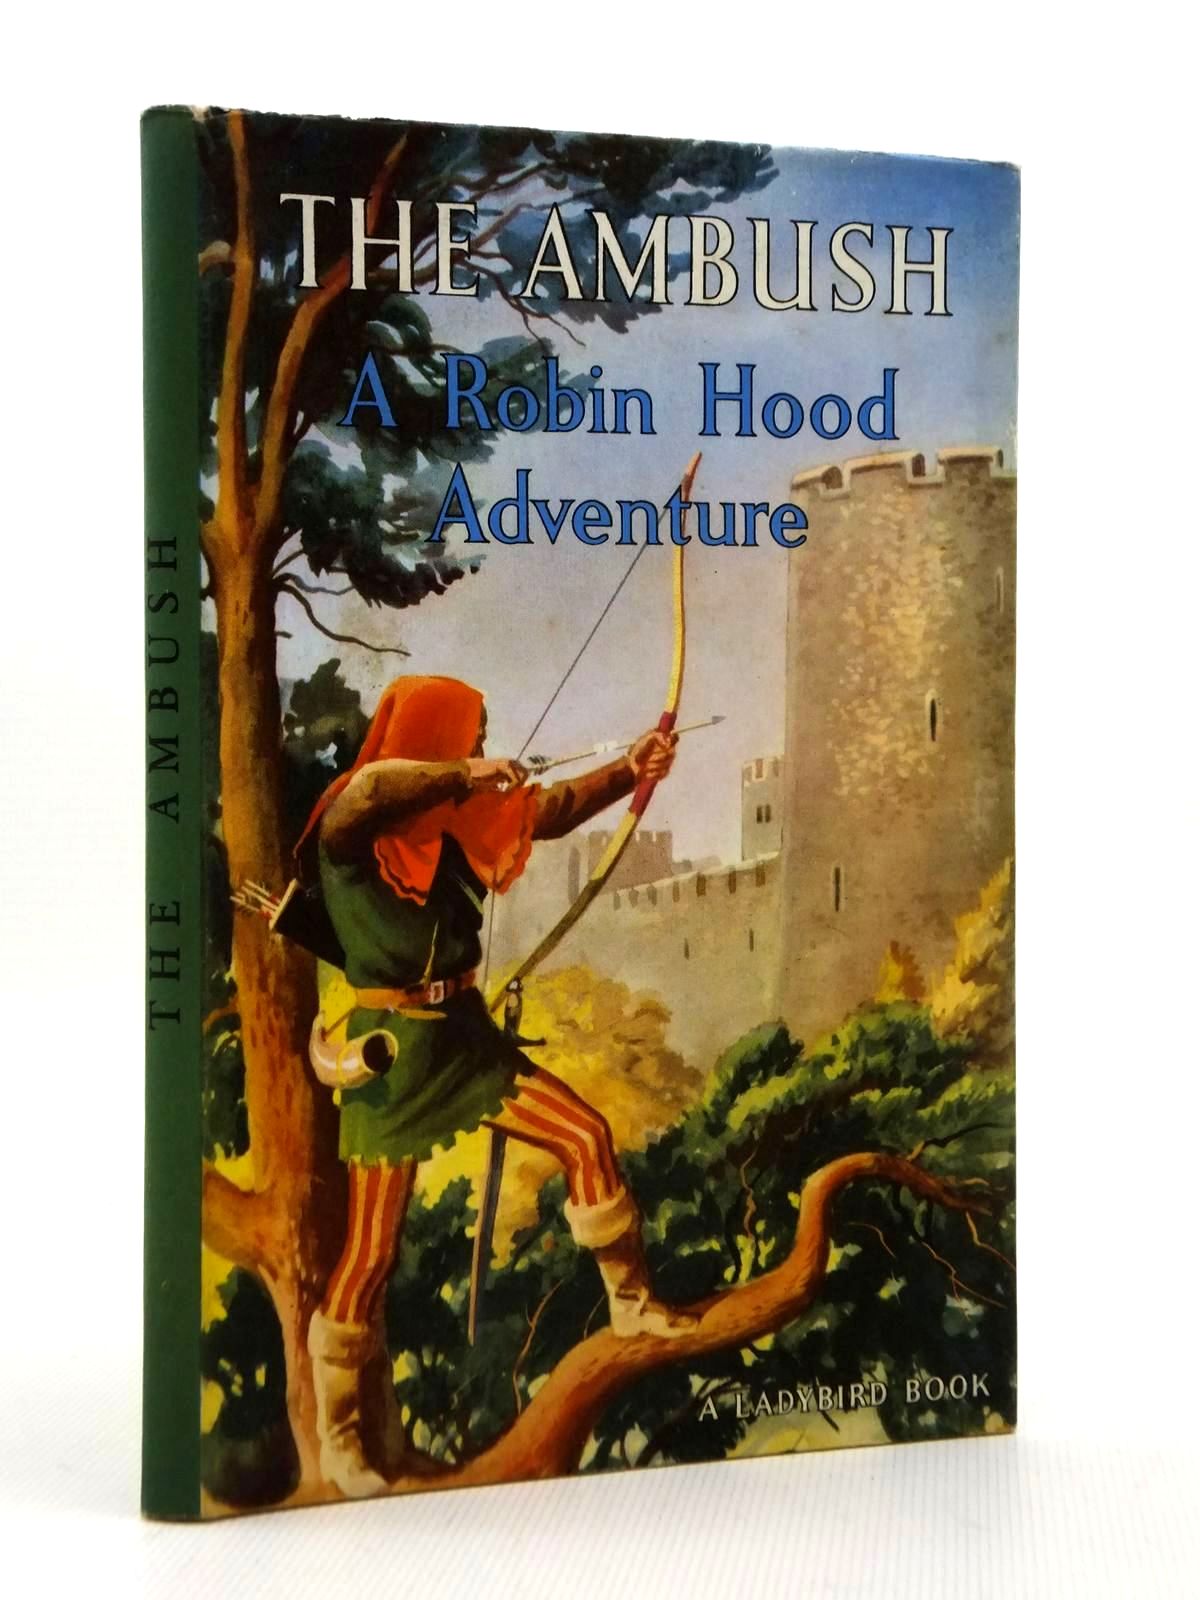 Photo of THE AMBUSH written by Kester, Max illustrated by Kenney, John published by Wills &amp; Hepworth Ltd. (STOCK CODE: 1316852)  for sale by Stella & Rose's Books